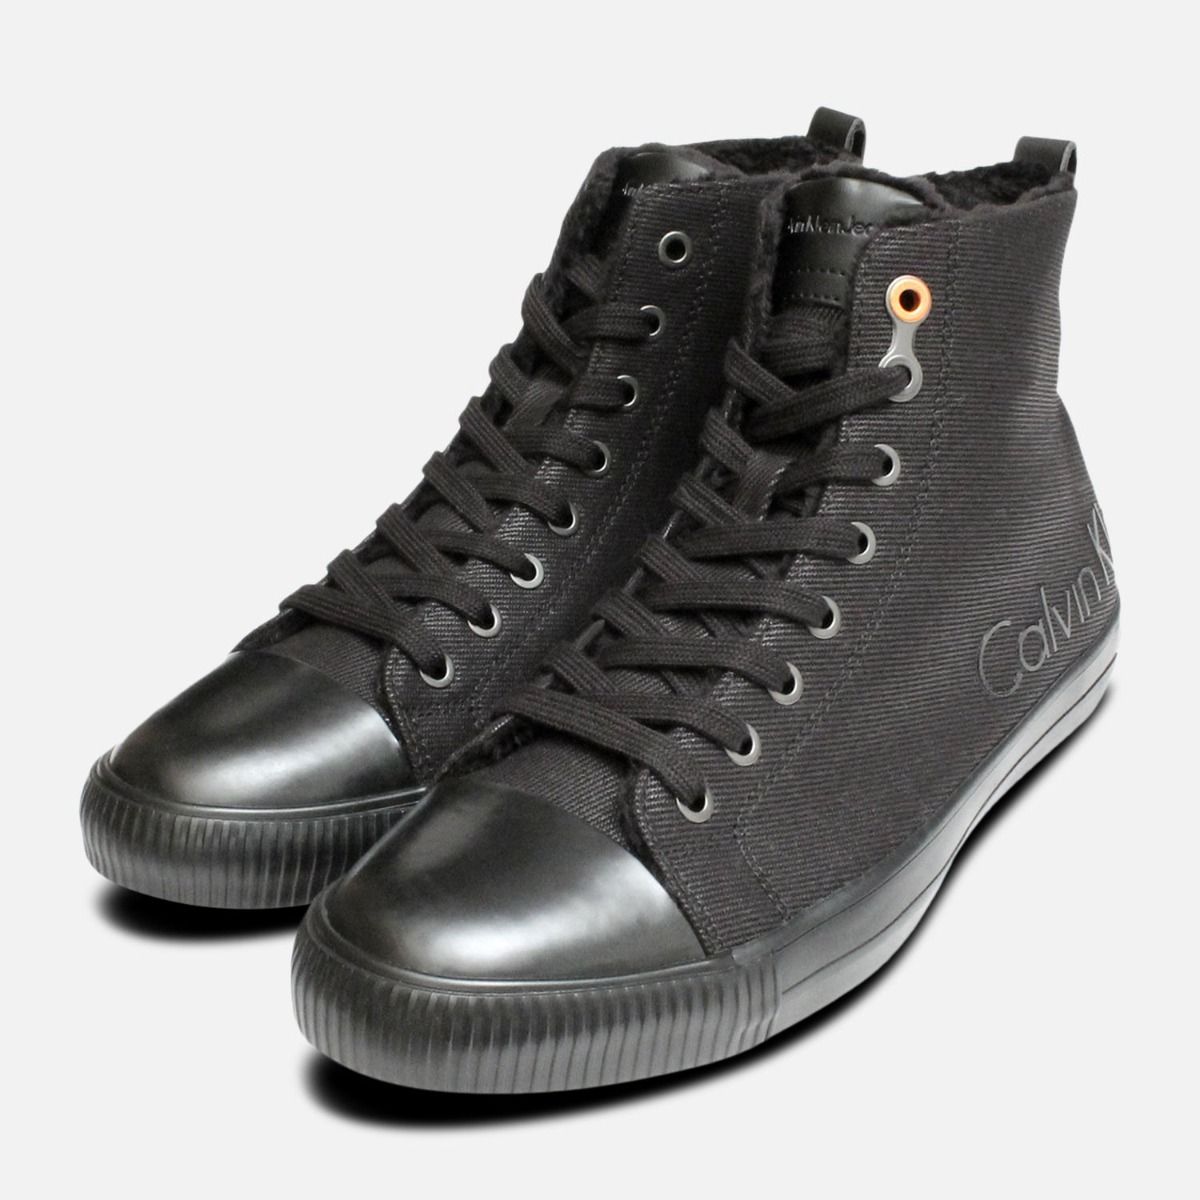 Calvin Klein Warm Lined High Tops in Black